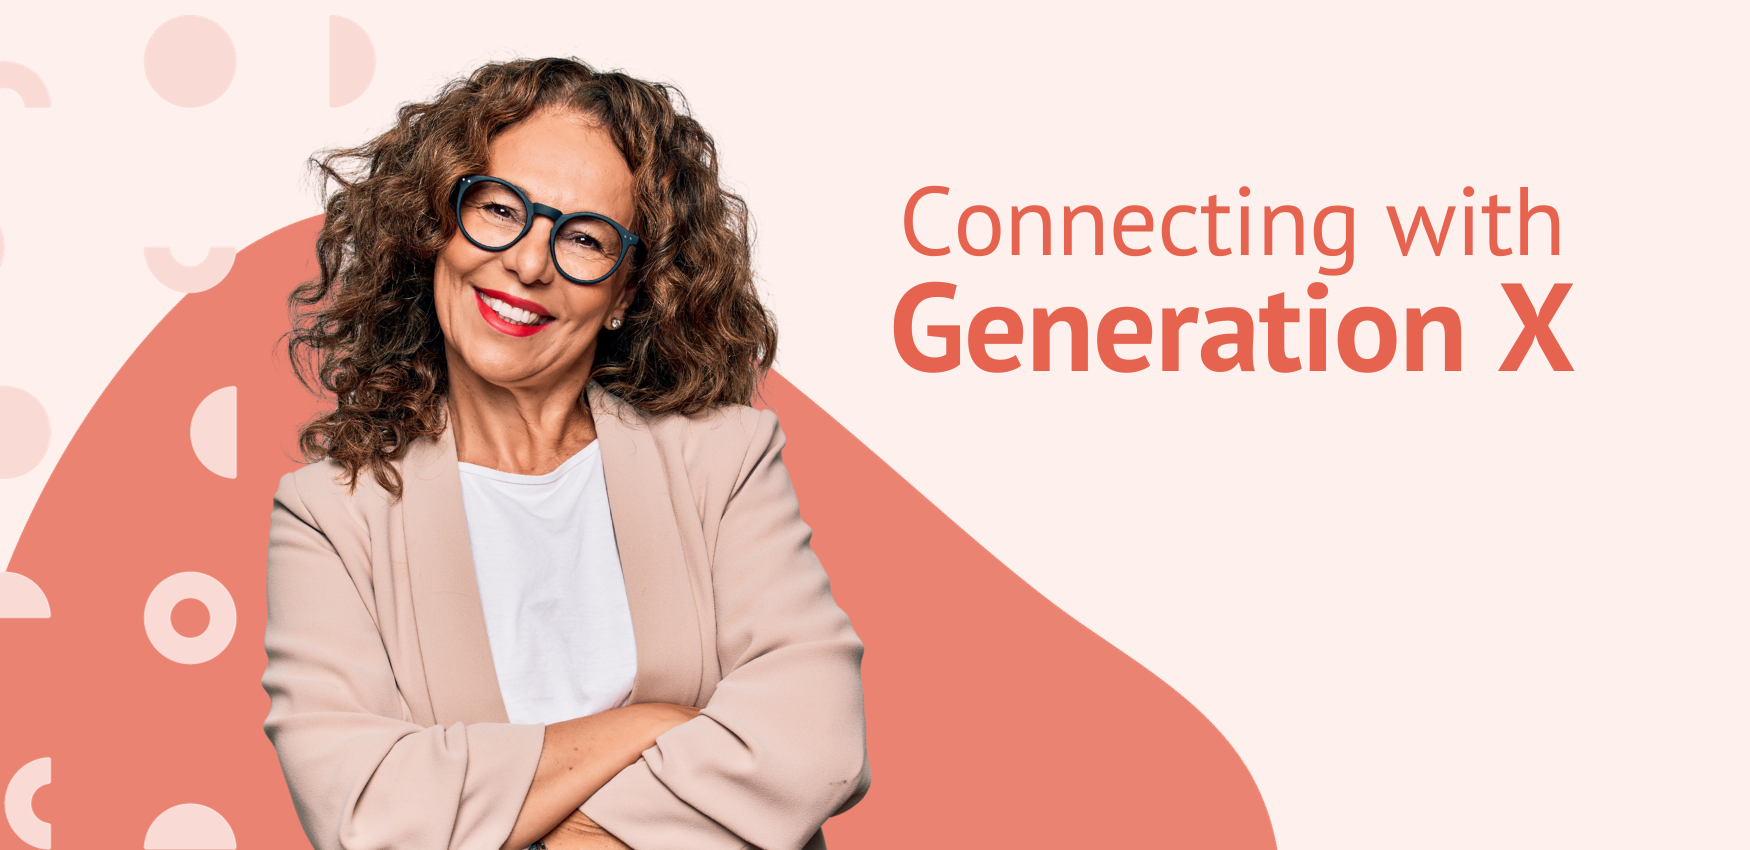 Connecting with Generation X